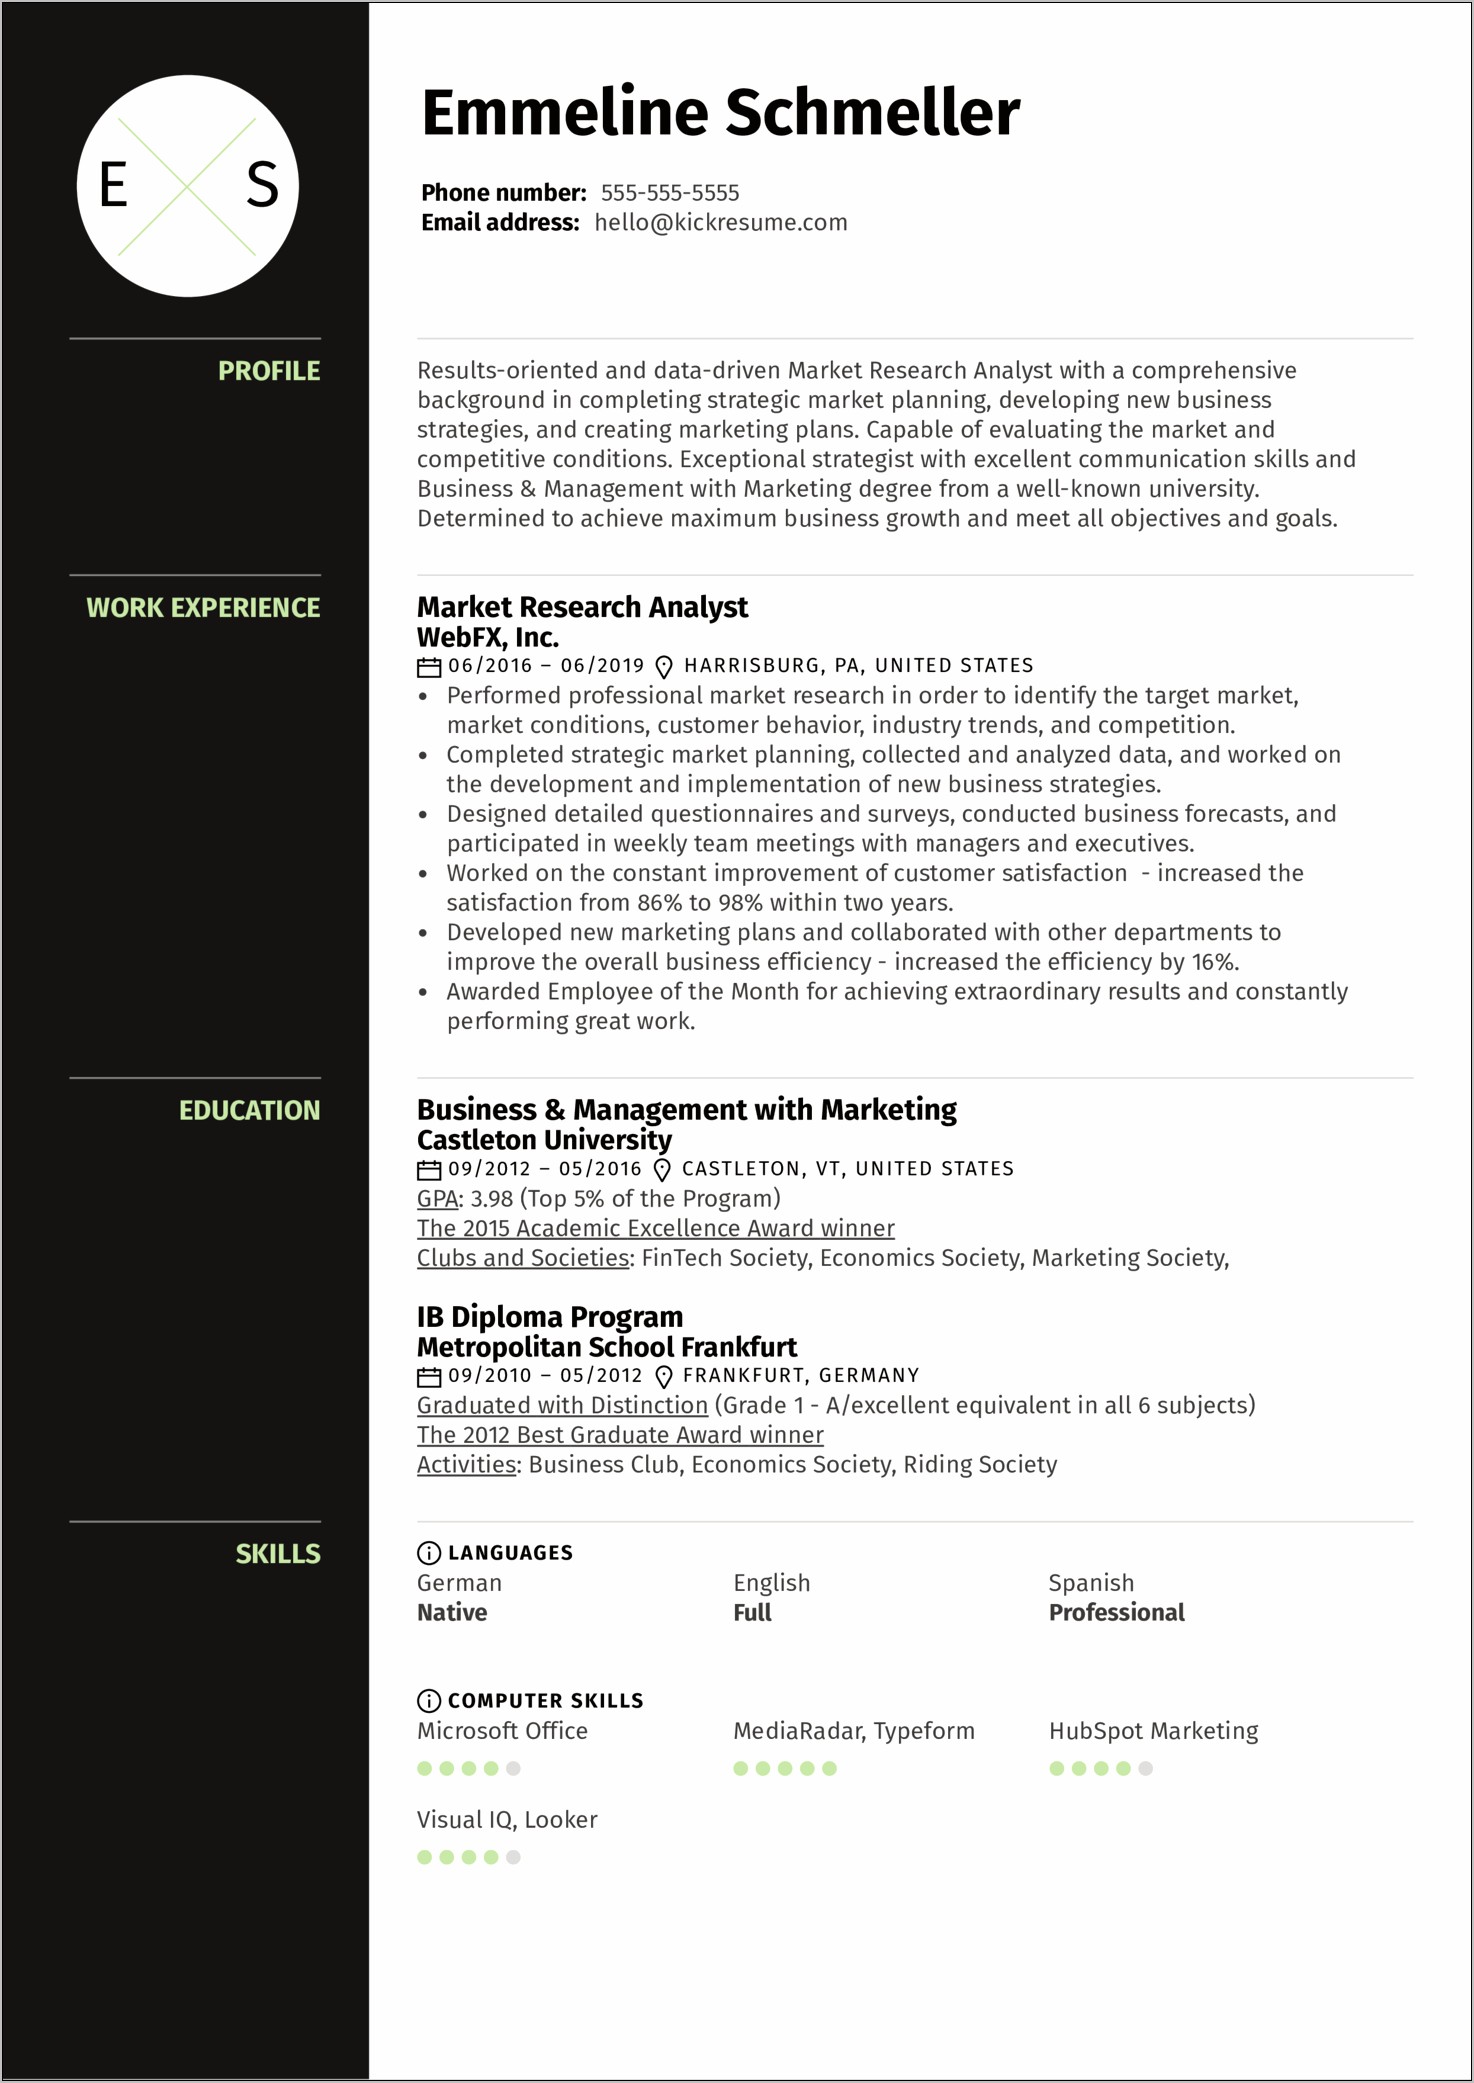 Best Resumes For People In Marketing Analysis